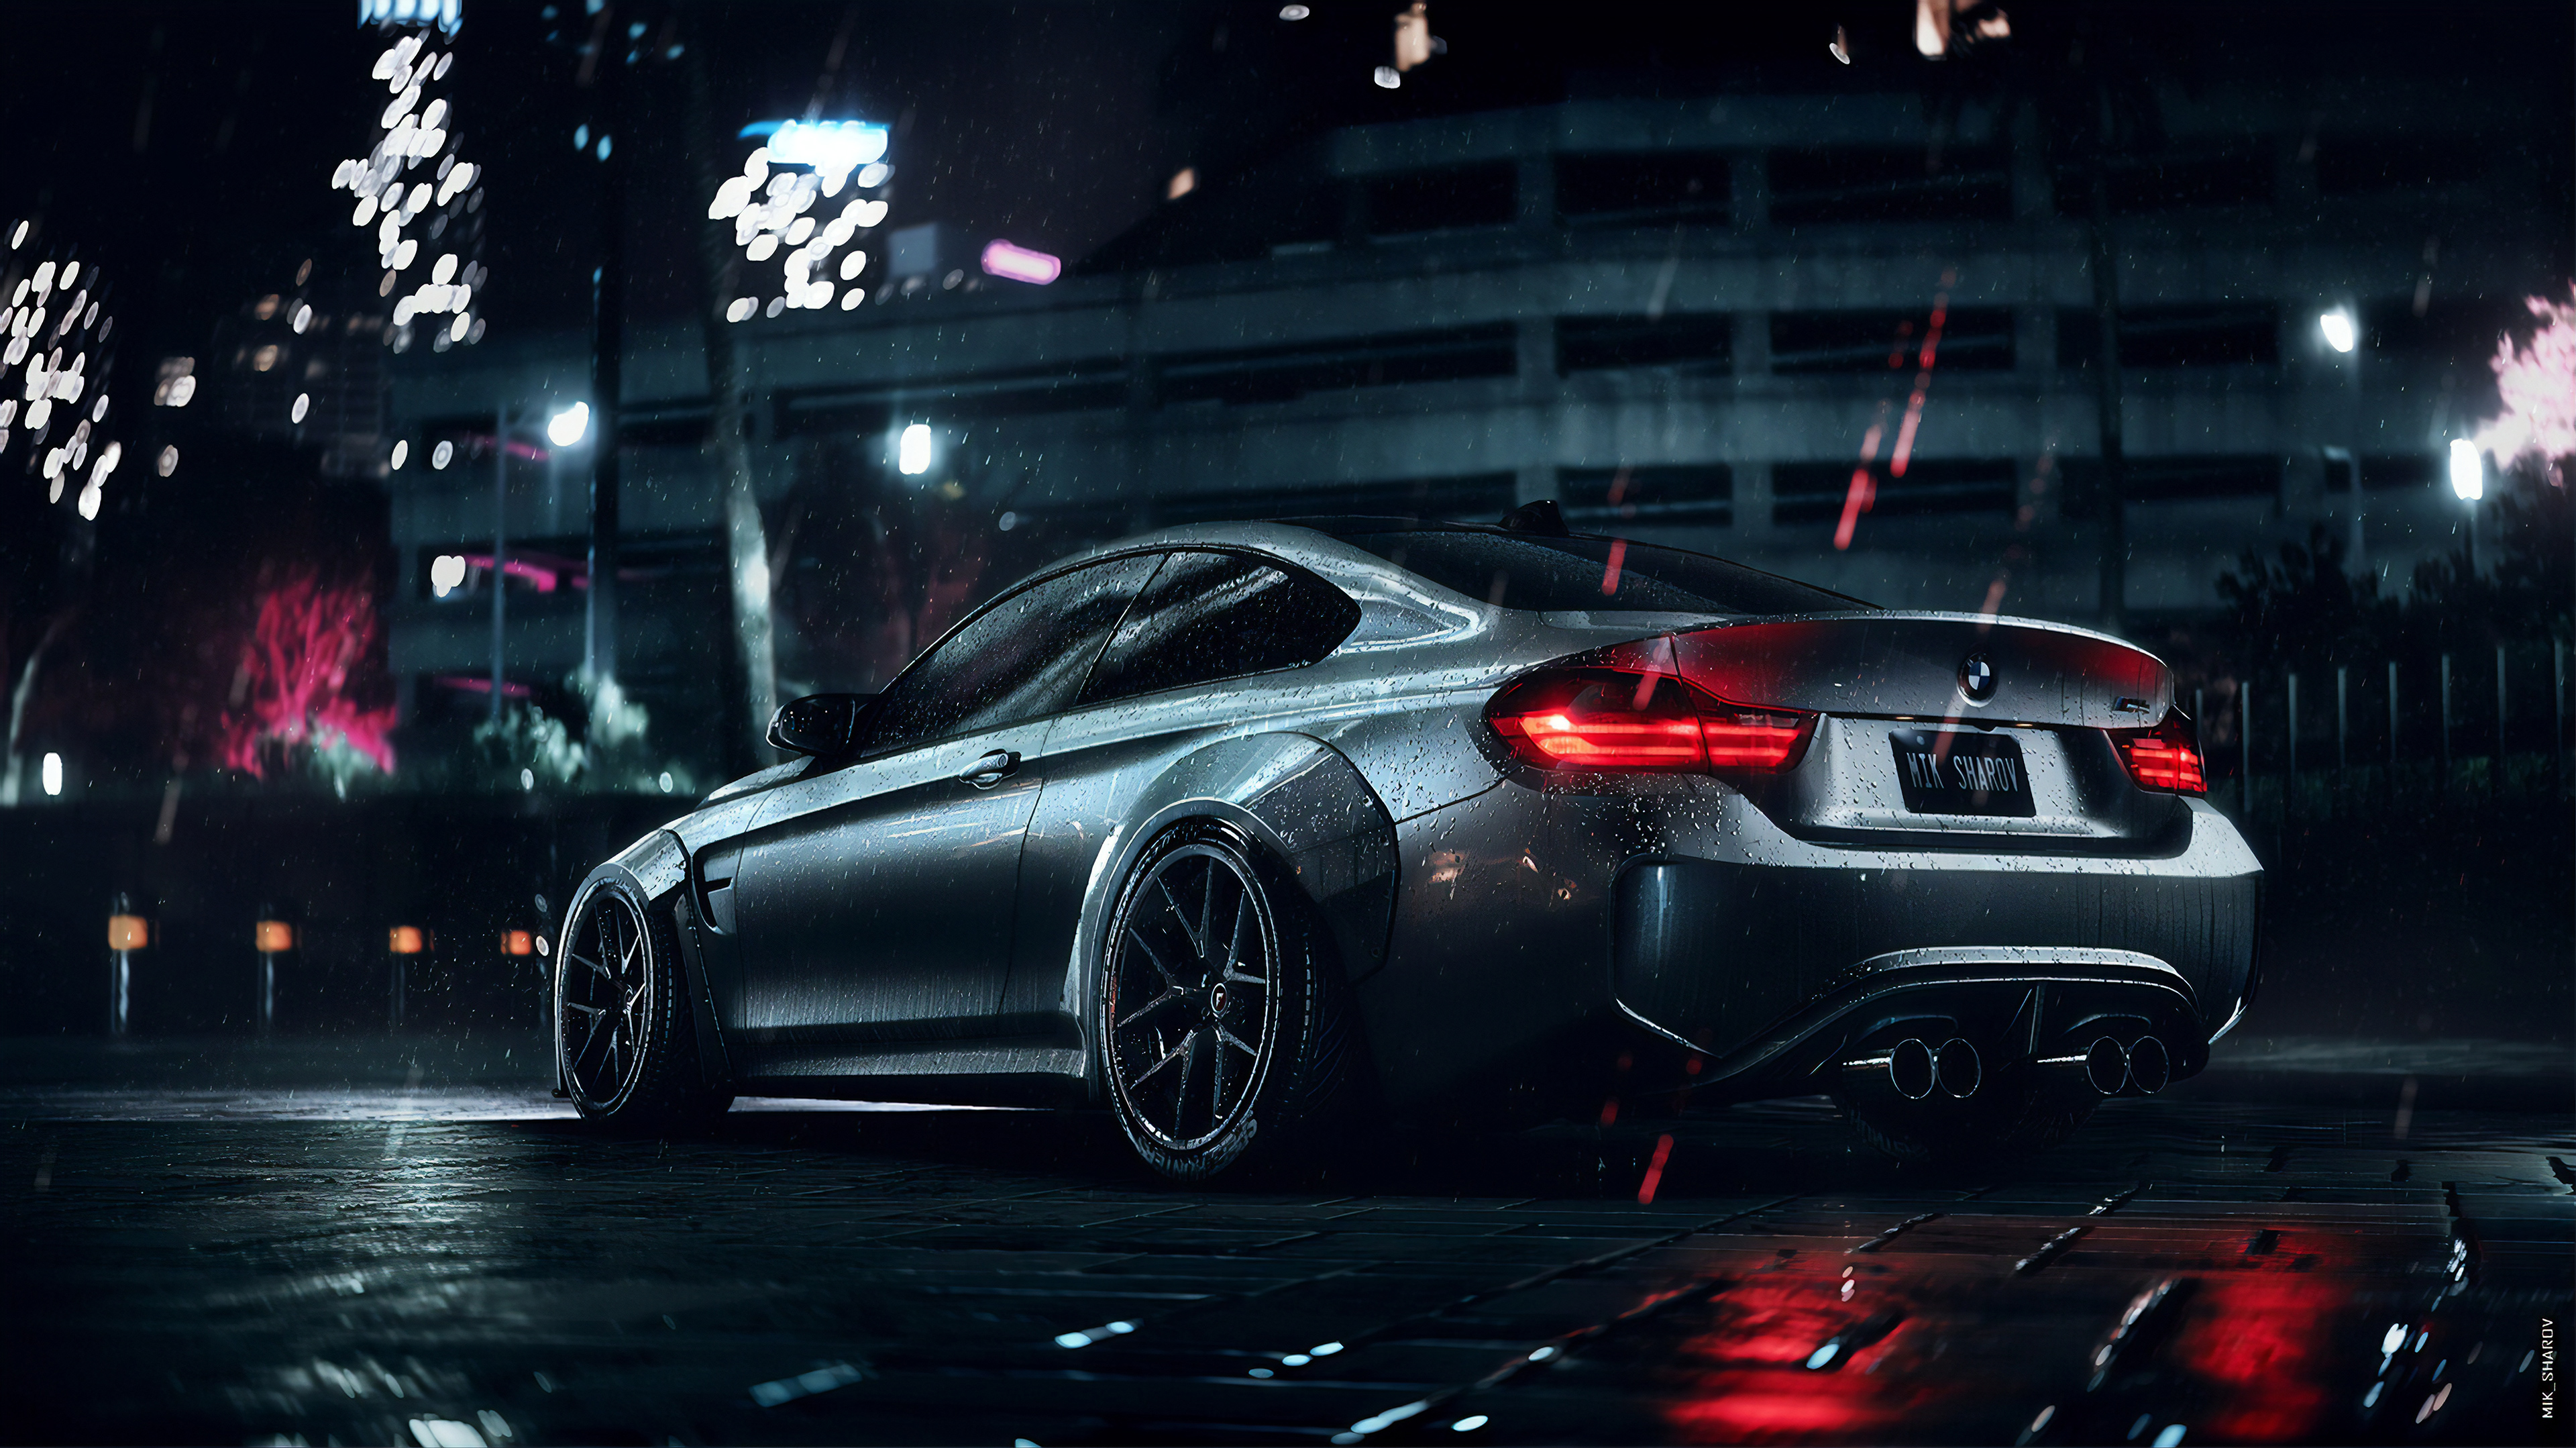 Need For Speed Bmw Dark Night 4k, HD Games, 4k Wallpaper, Image, Background, Photo and Picture